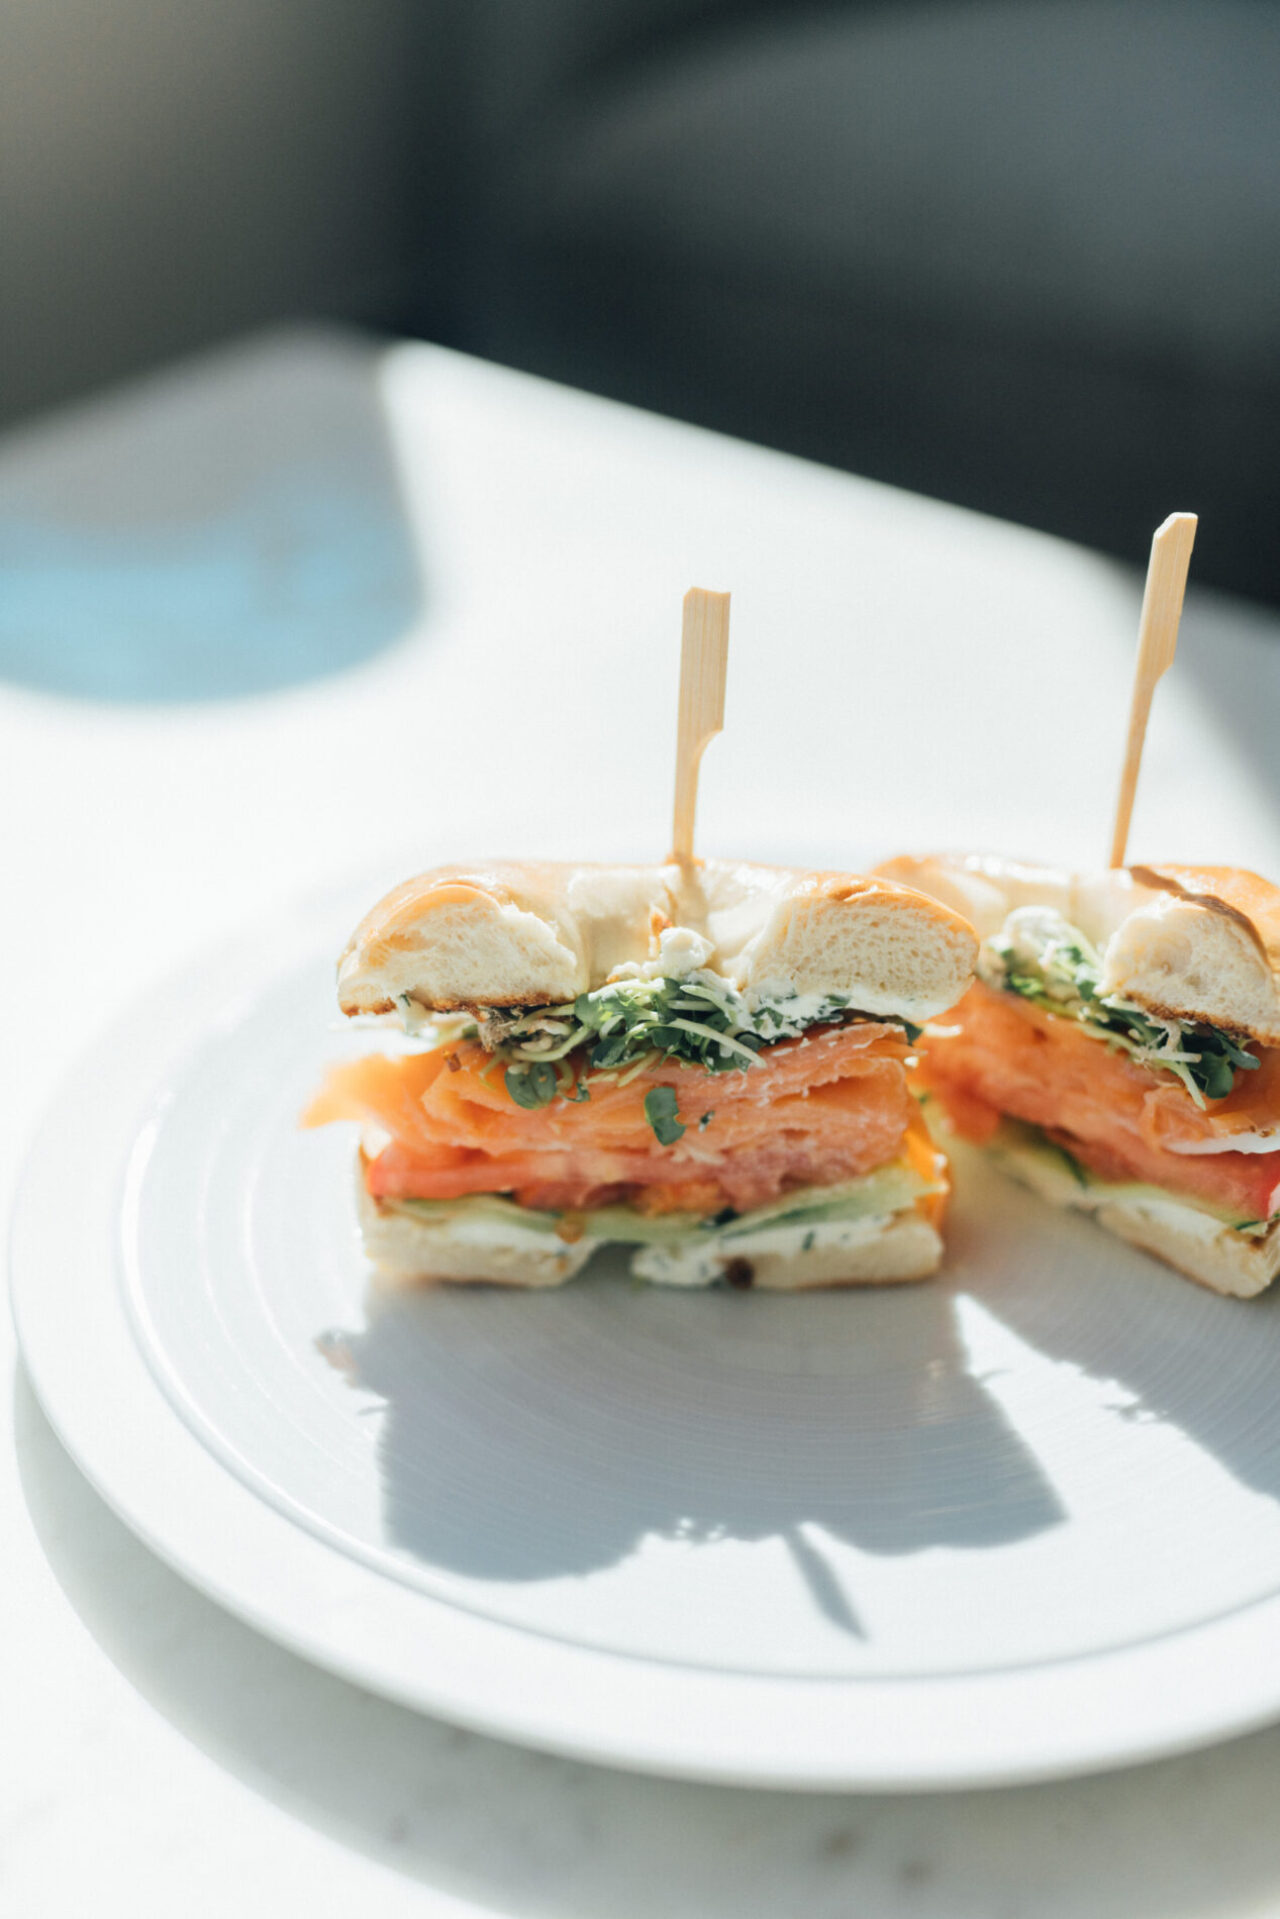 Bagel sandwich with lox and greens at our rooftop restaurant in Denver